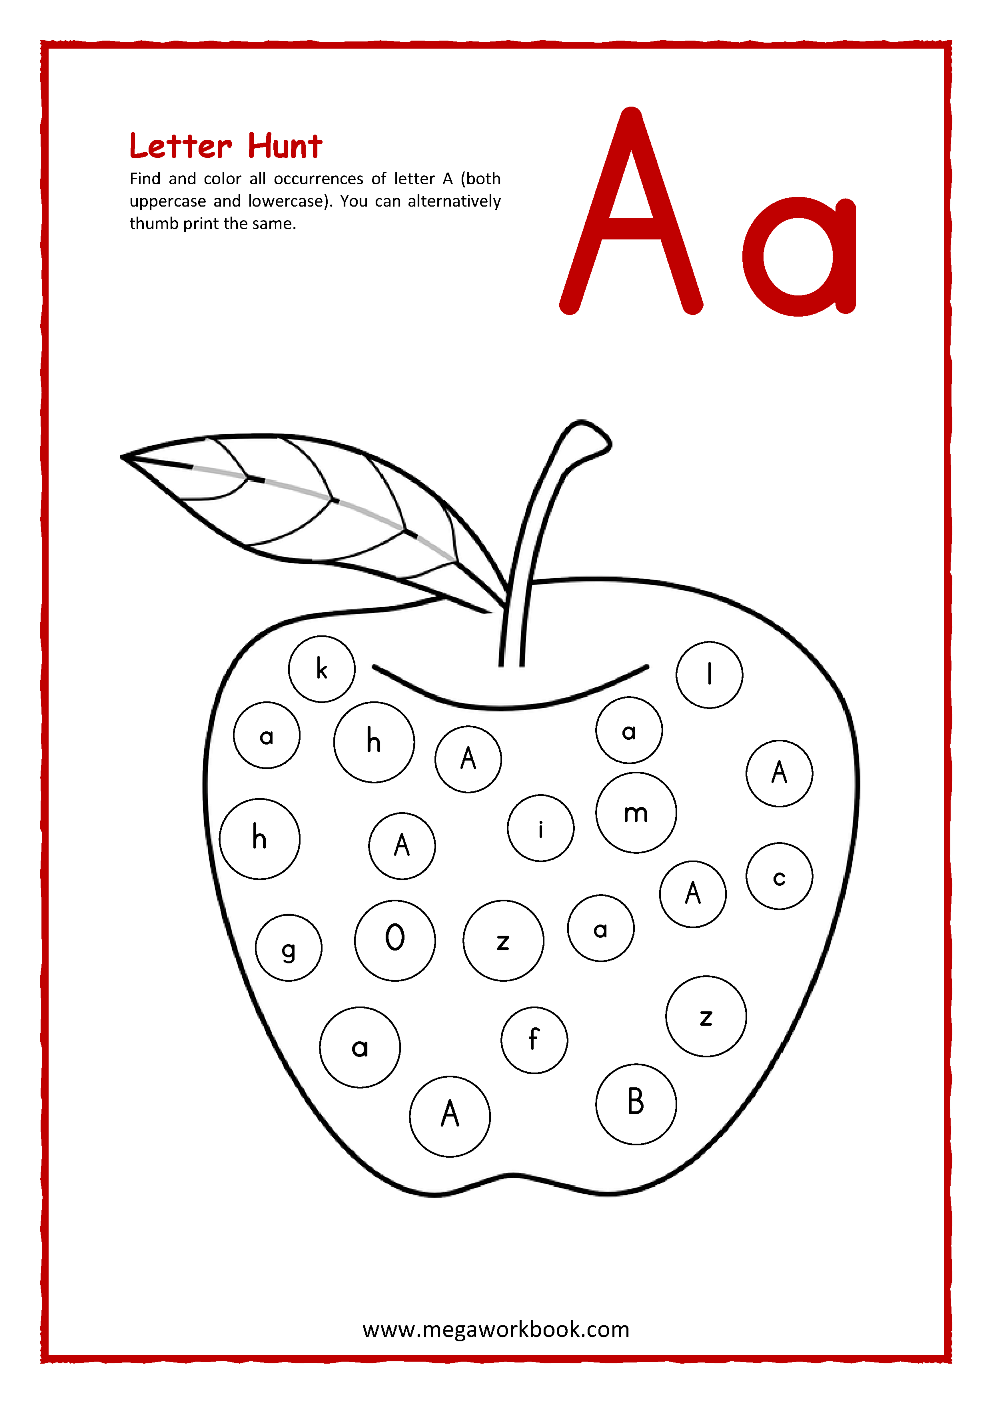 Letter A Activities - Letter A Worksheets - Letter A ...